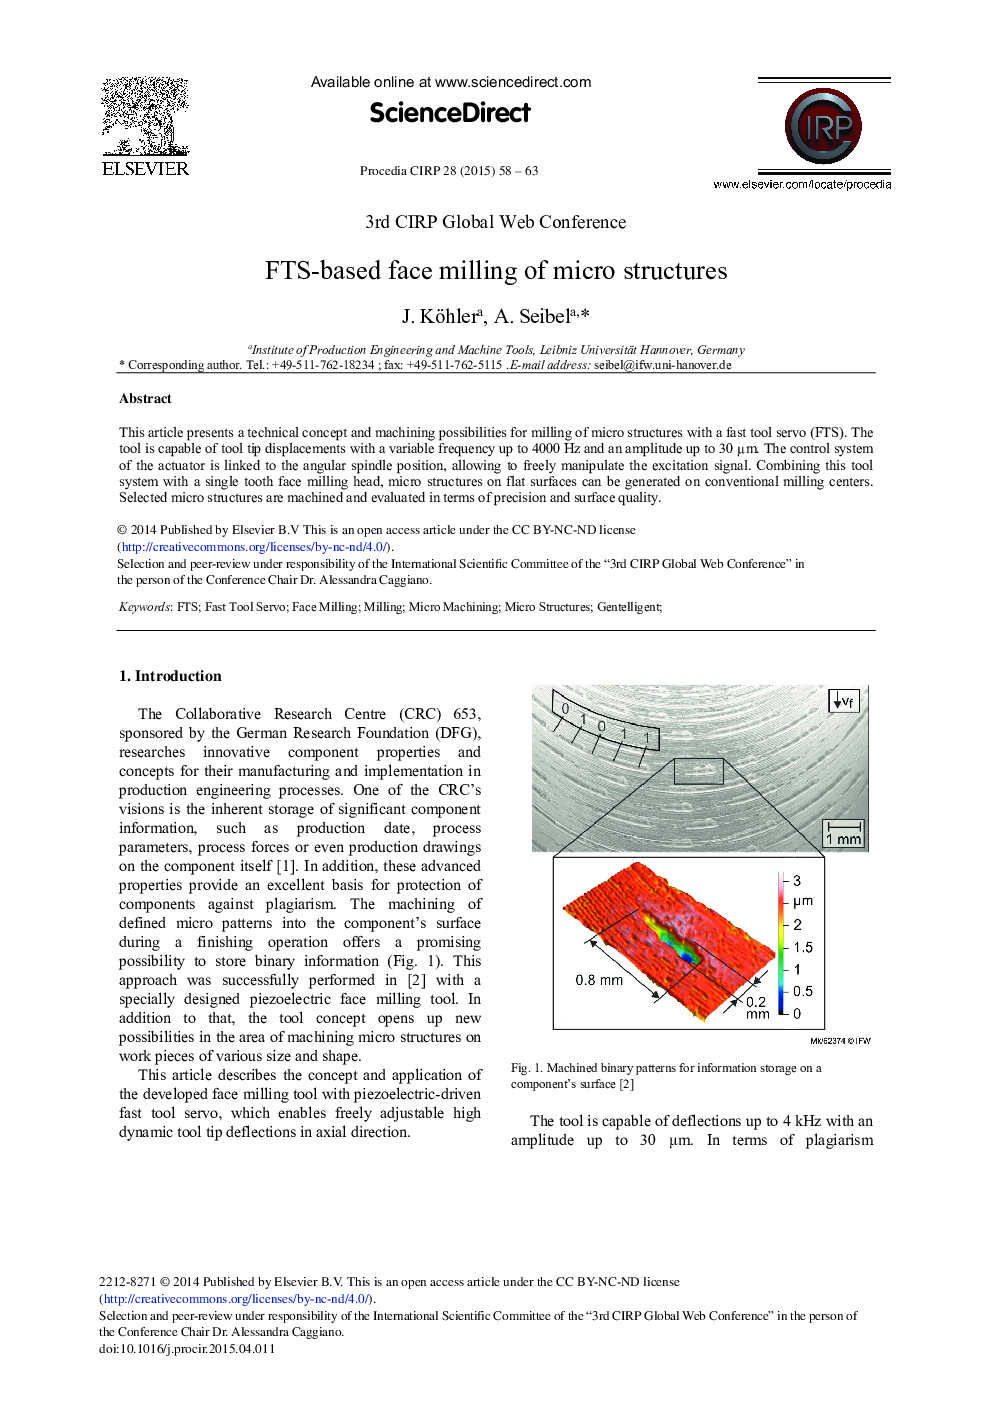 FTS-based Face Milling of Micro Structures 